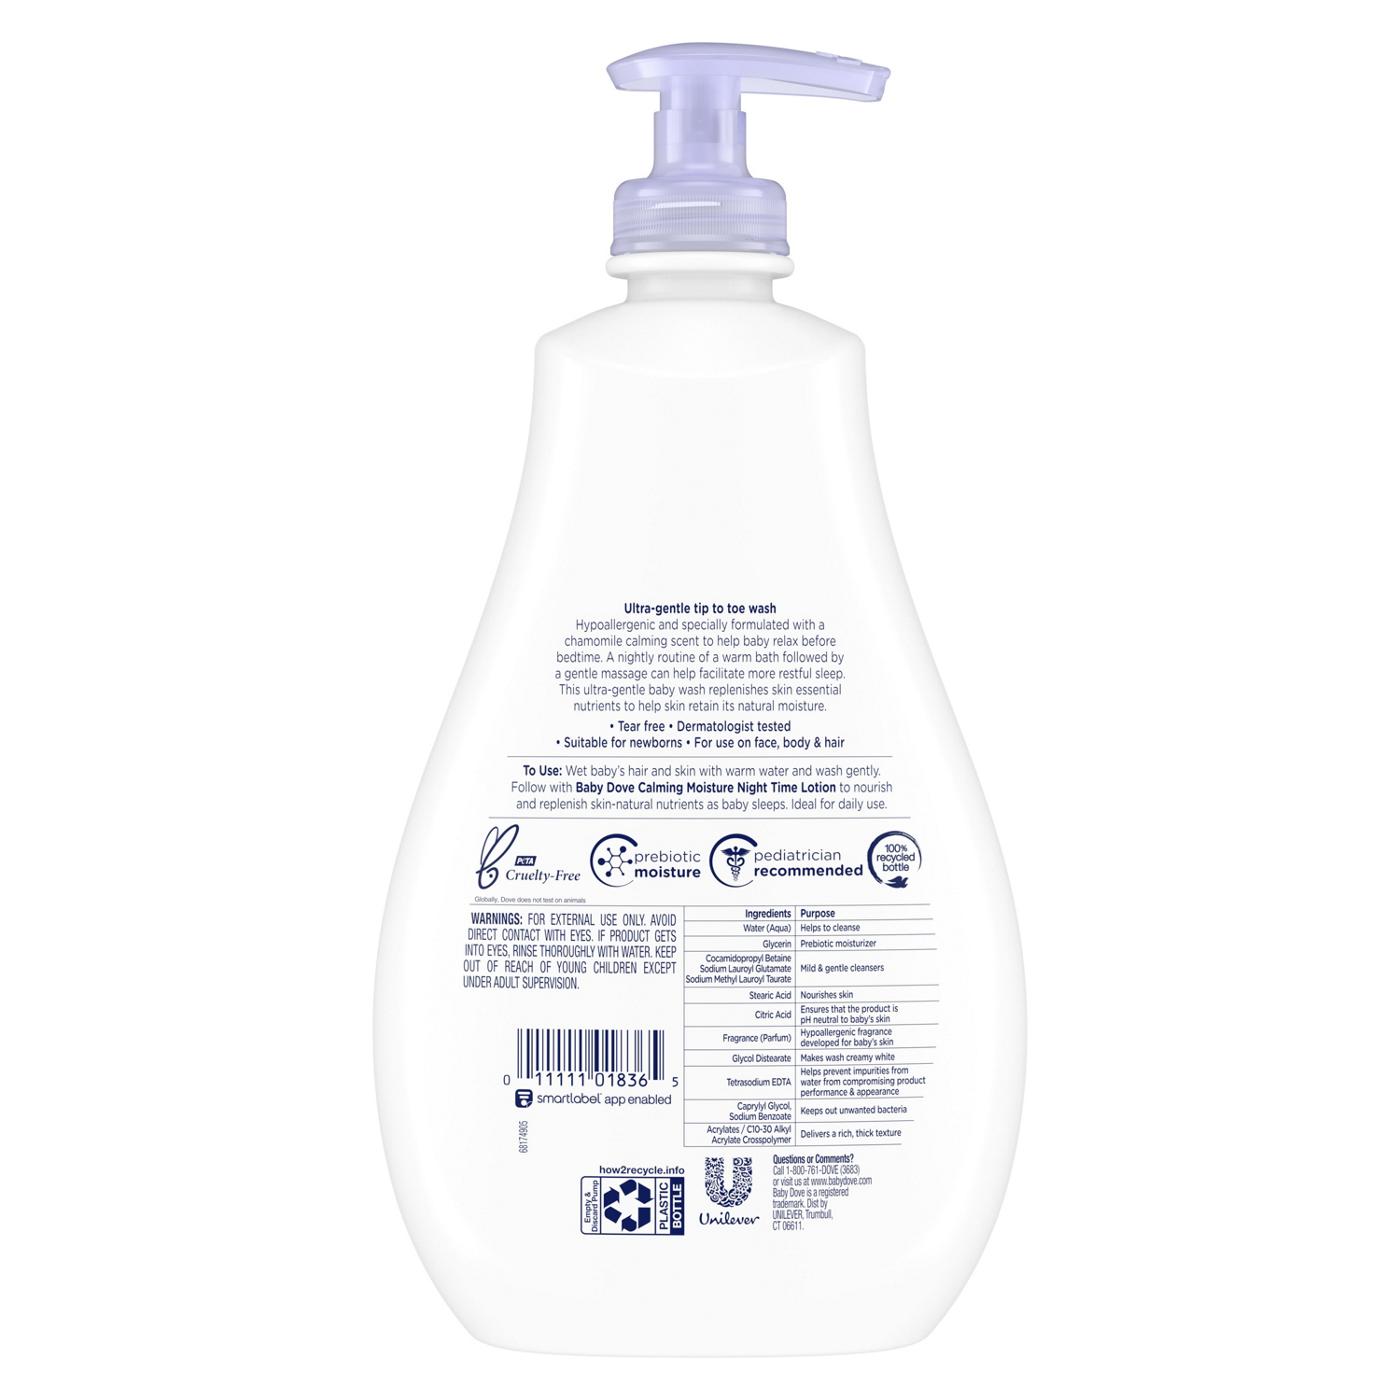 Baby Dove Sensitive Skin Care Night Time Calming Wash; image 6 of 9